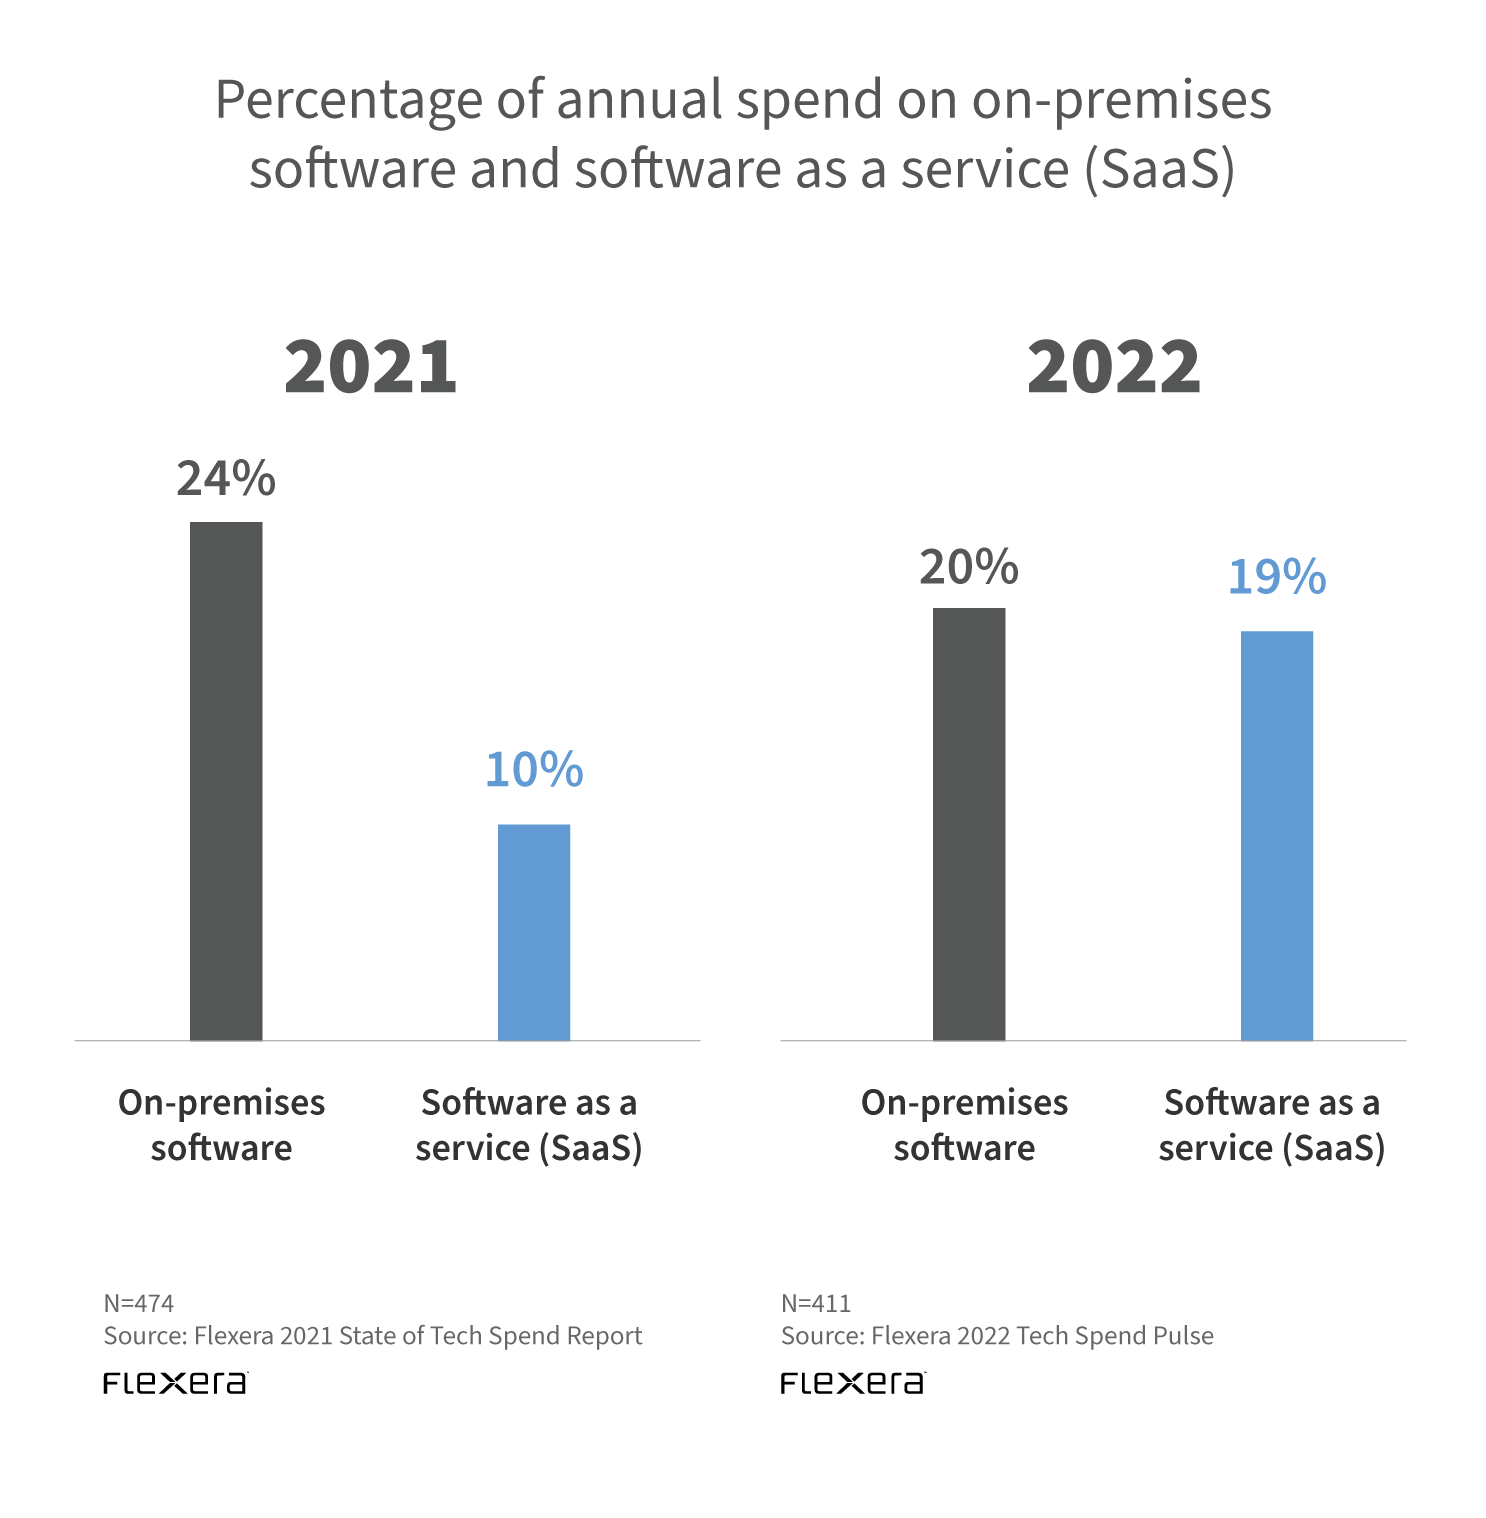 Percentage of annual spend on on-premises software and SaaS